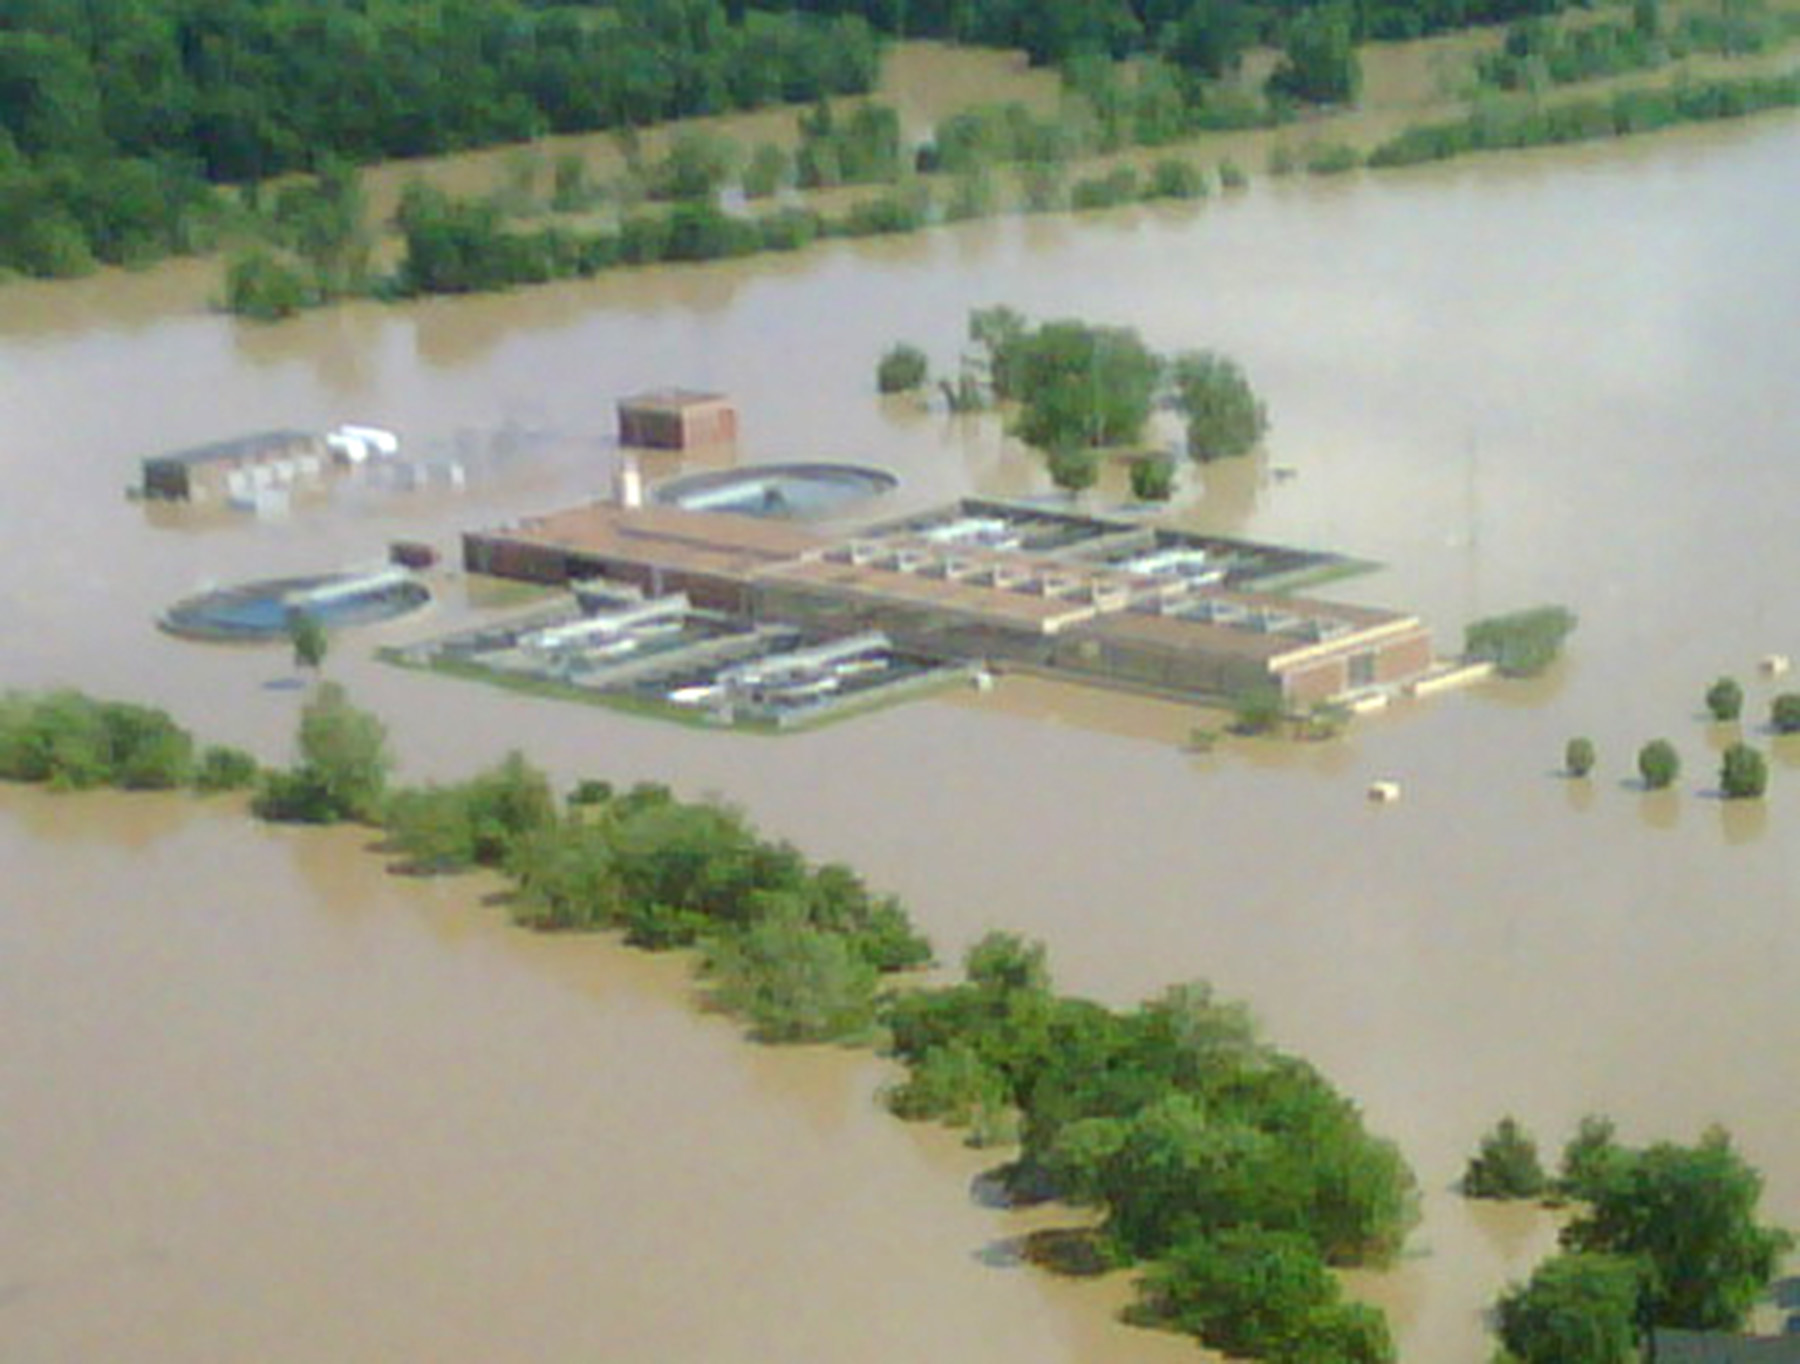 Aerial view of K.R. Harrington Water Treatment Plant and surrounding area overcome by floodwaters.